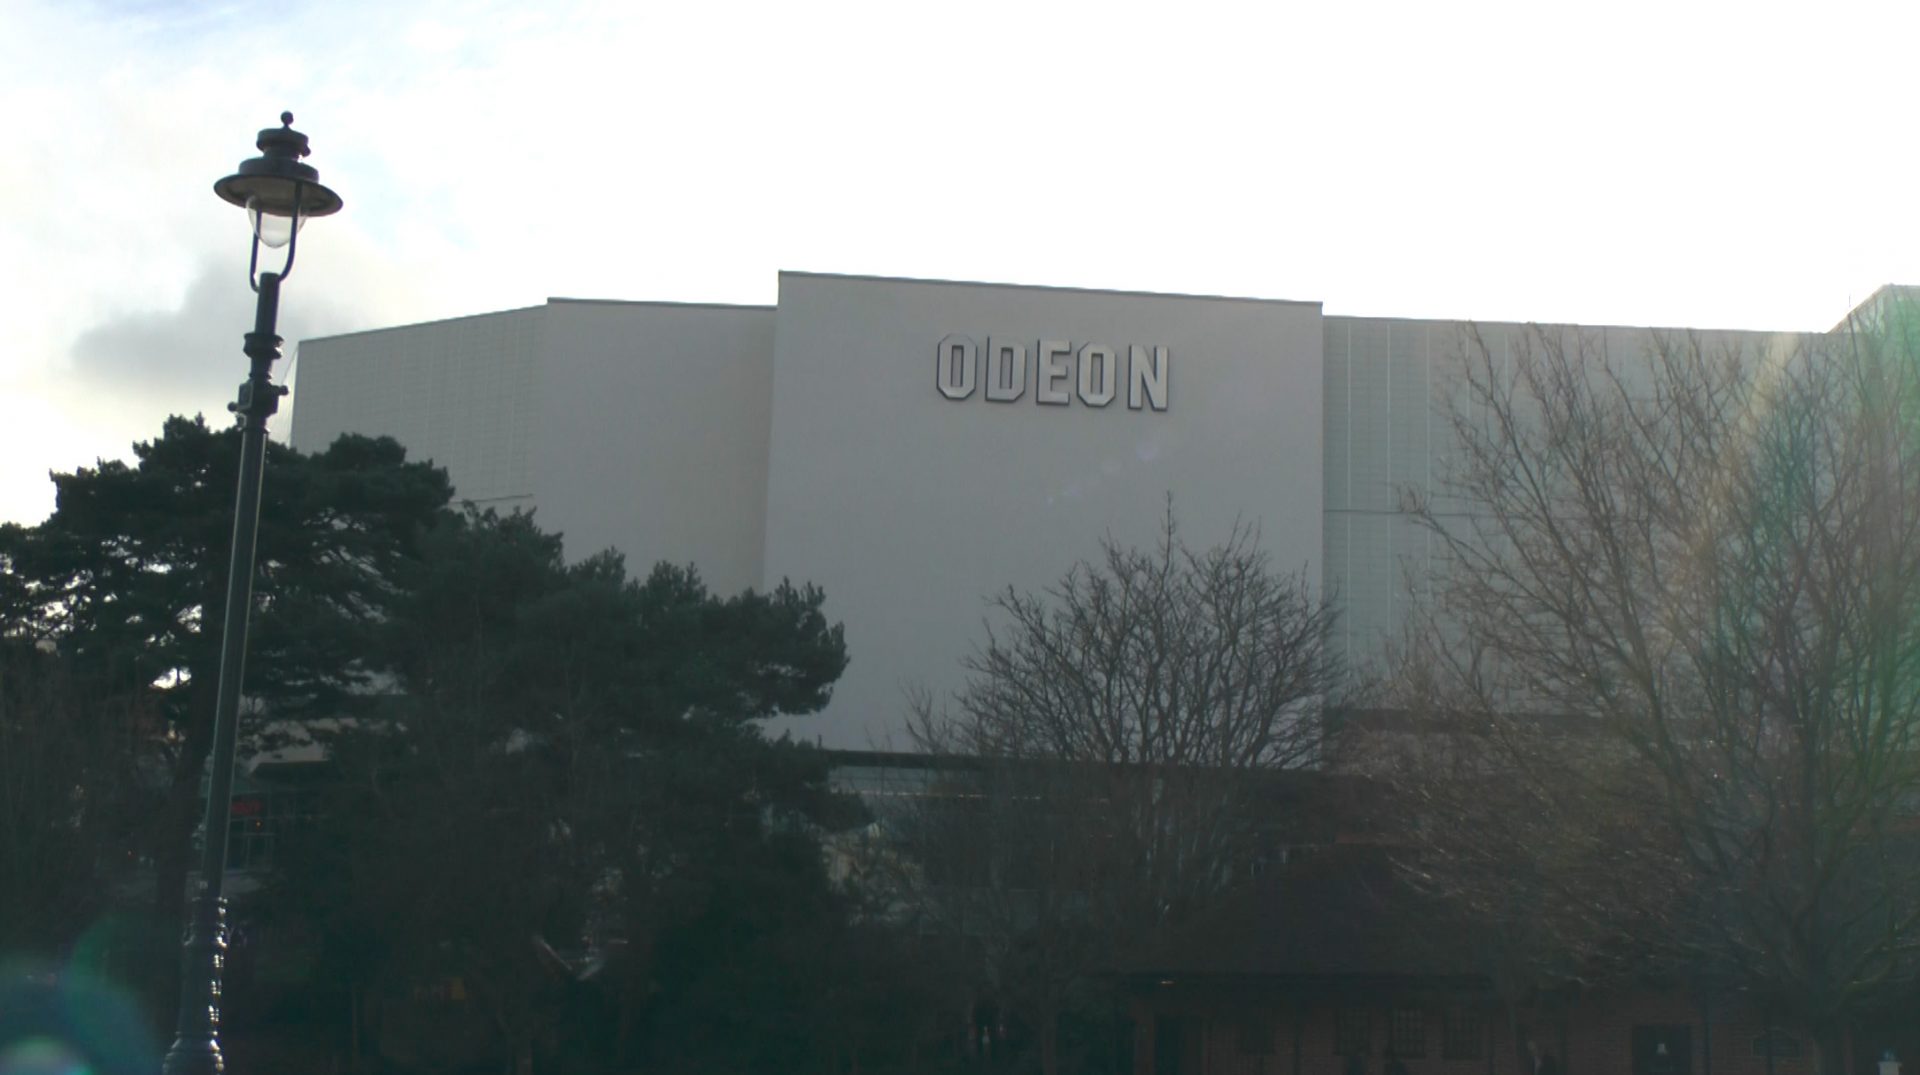 Still picture of the Odeon Cinema